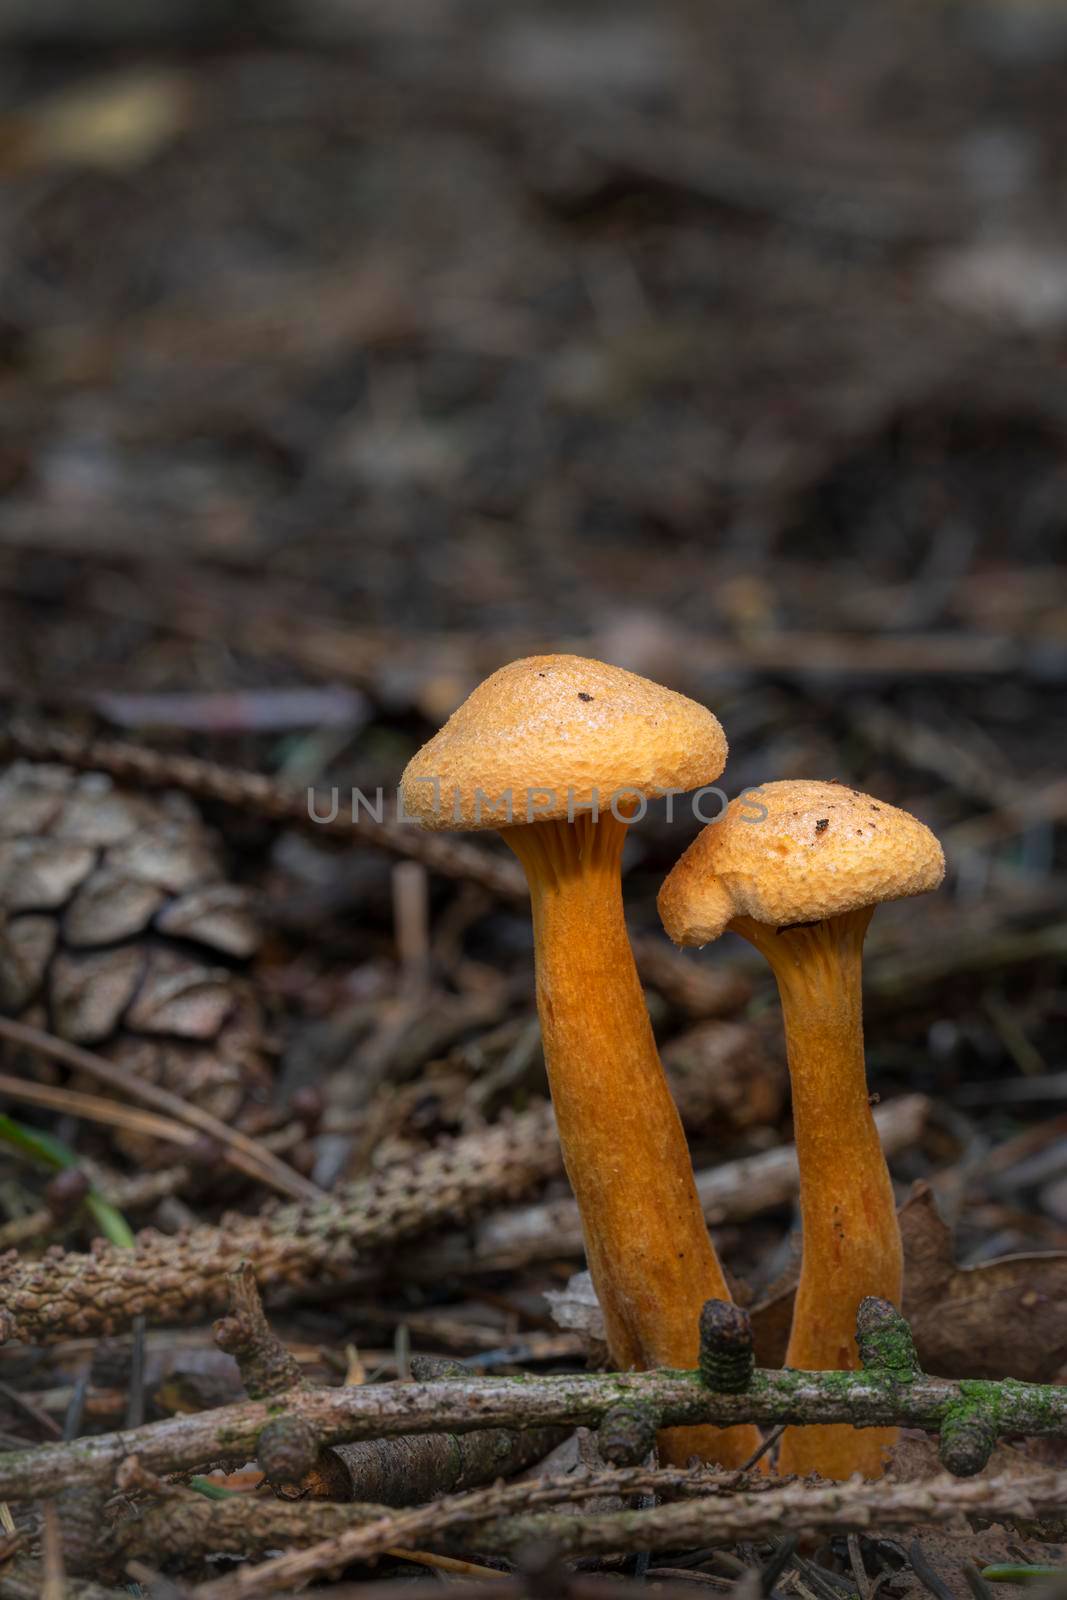 Mushrooms False Chanterelle Hygrophoropsis aurantiaca in a yellow-orange color in a coniferous forest in the Netherlands
